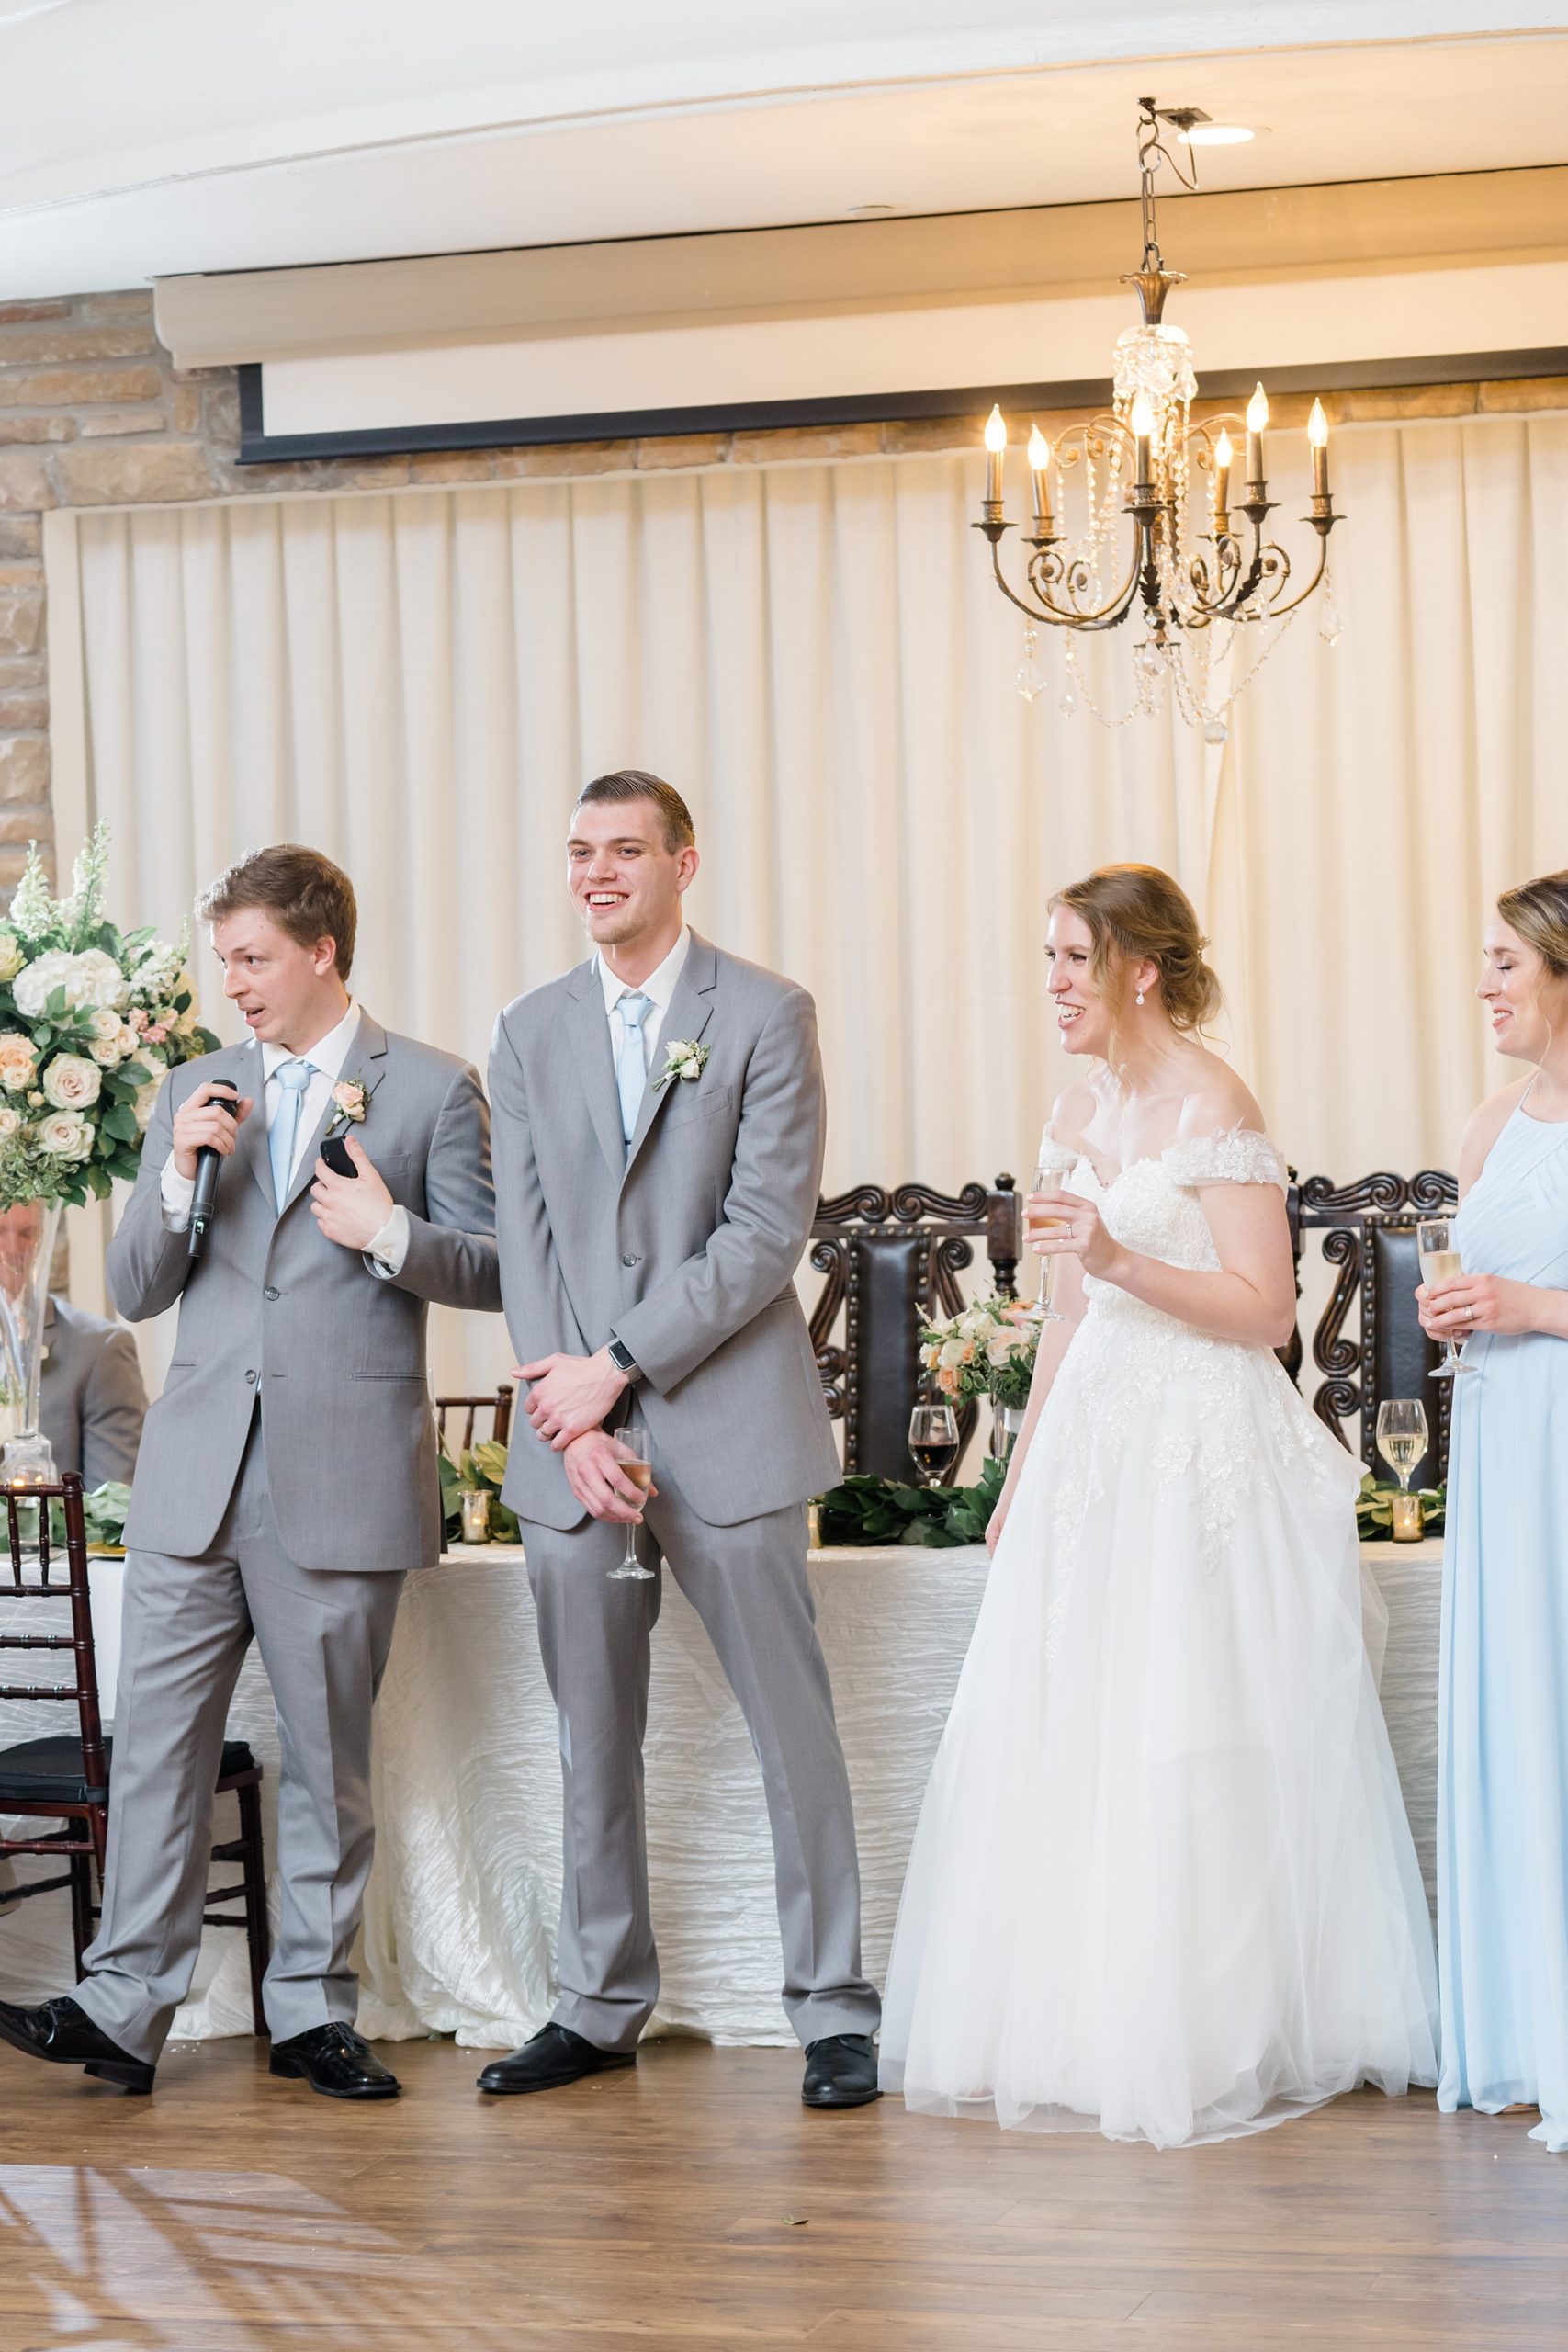 newlyweds laugh during toasts at Texas wedding reception